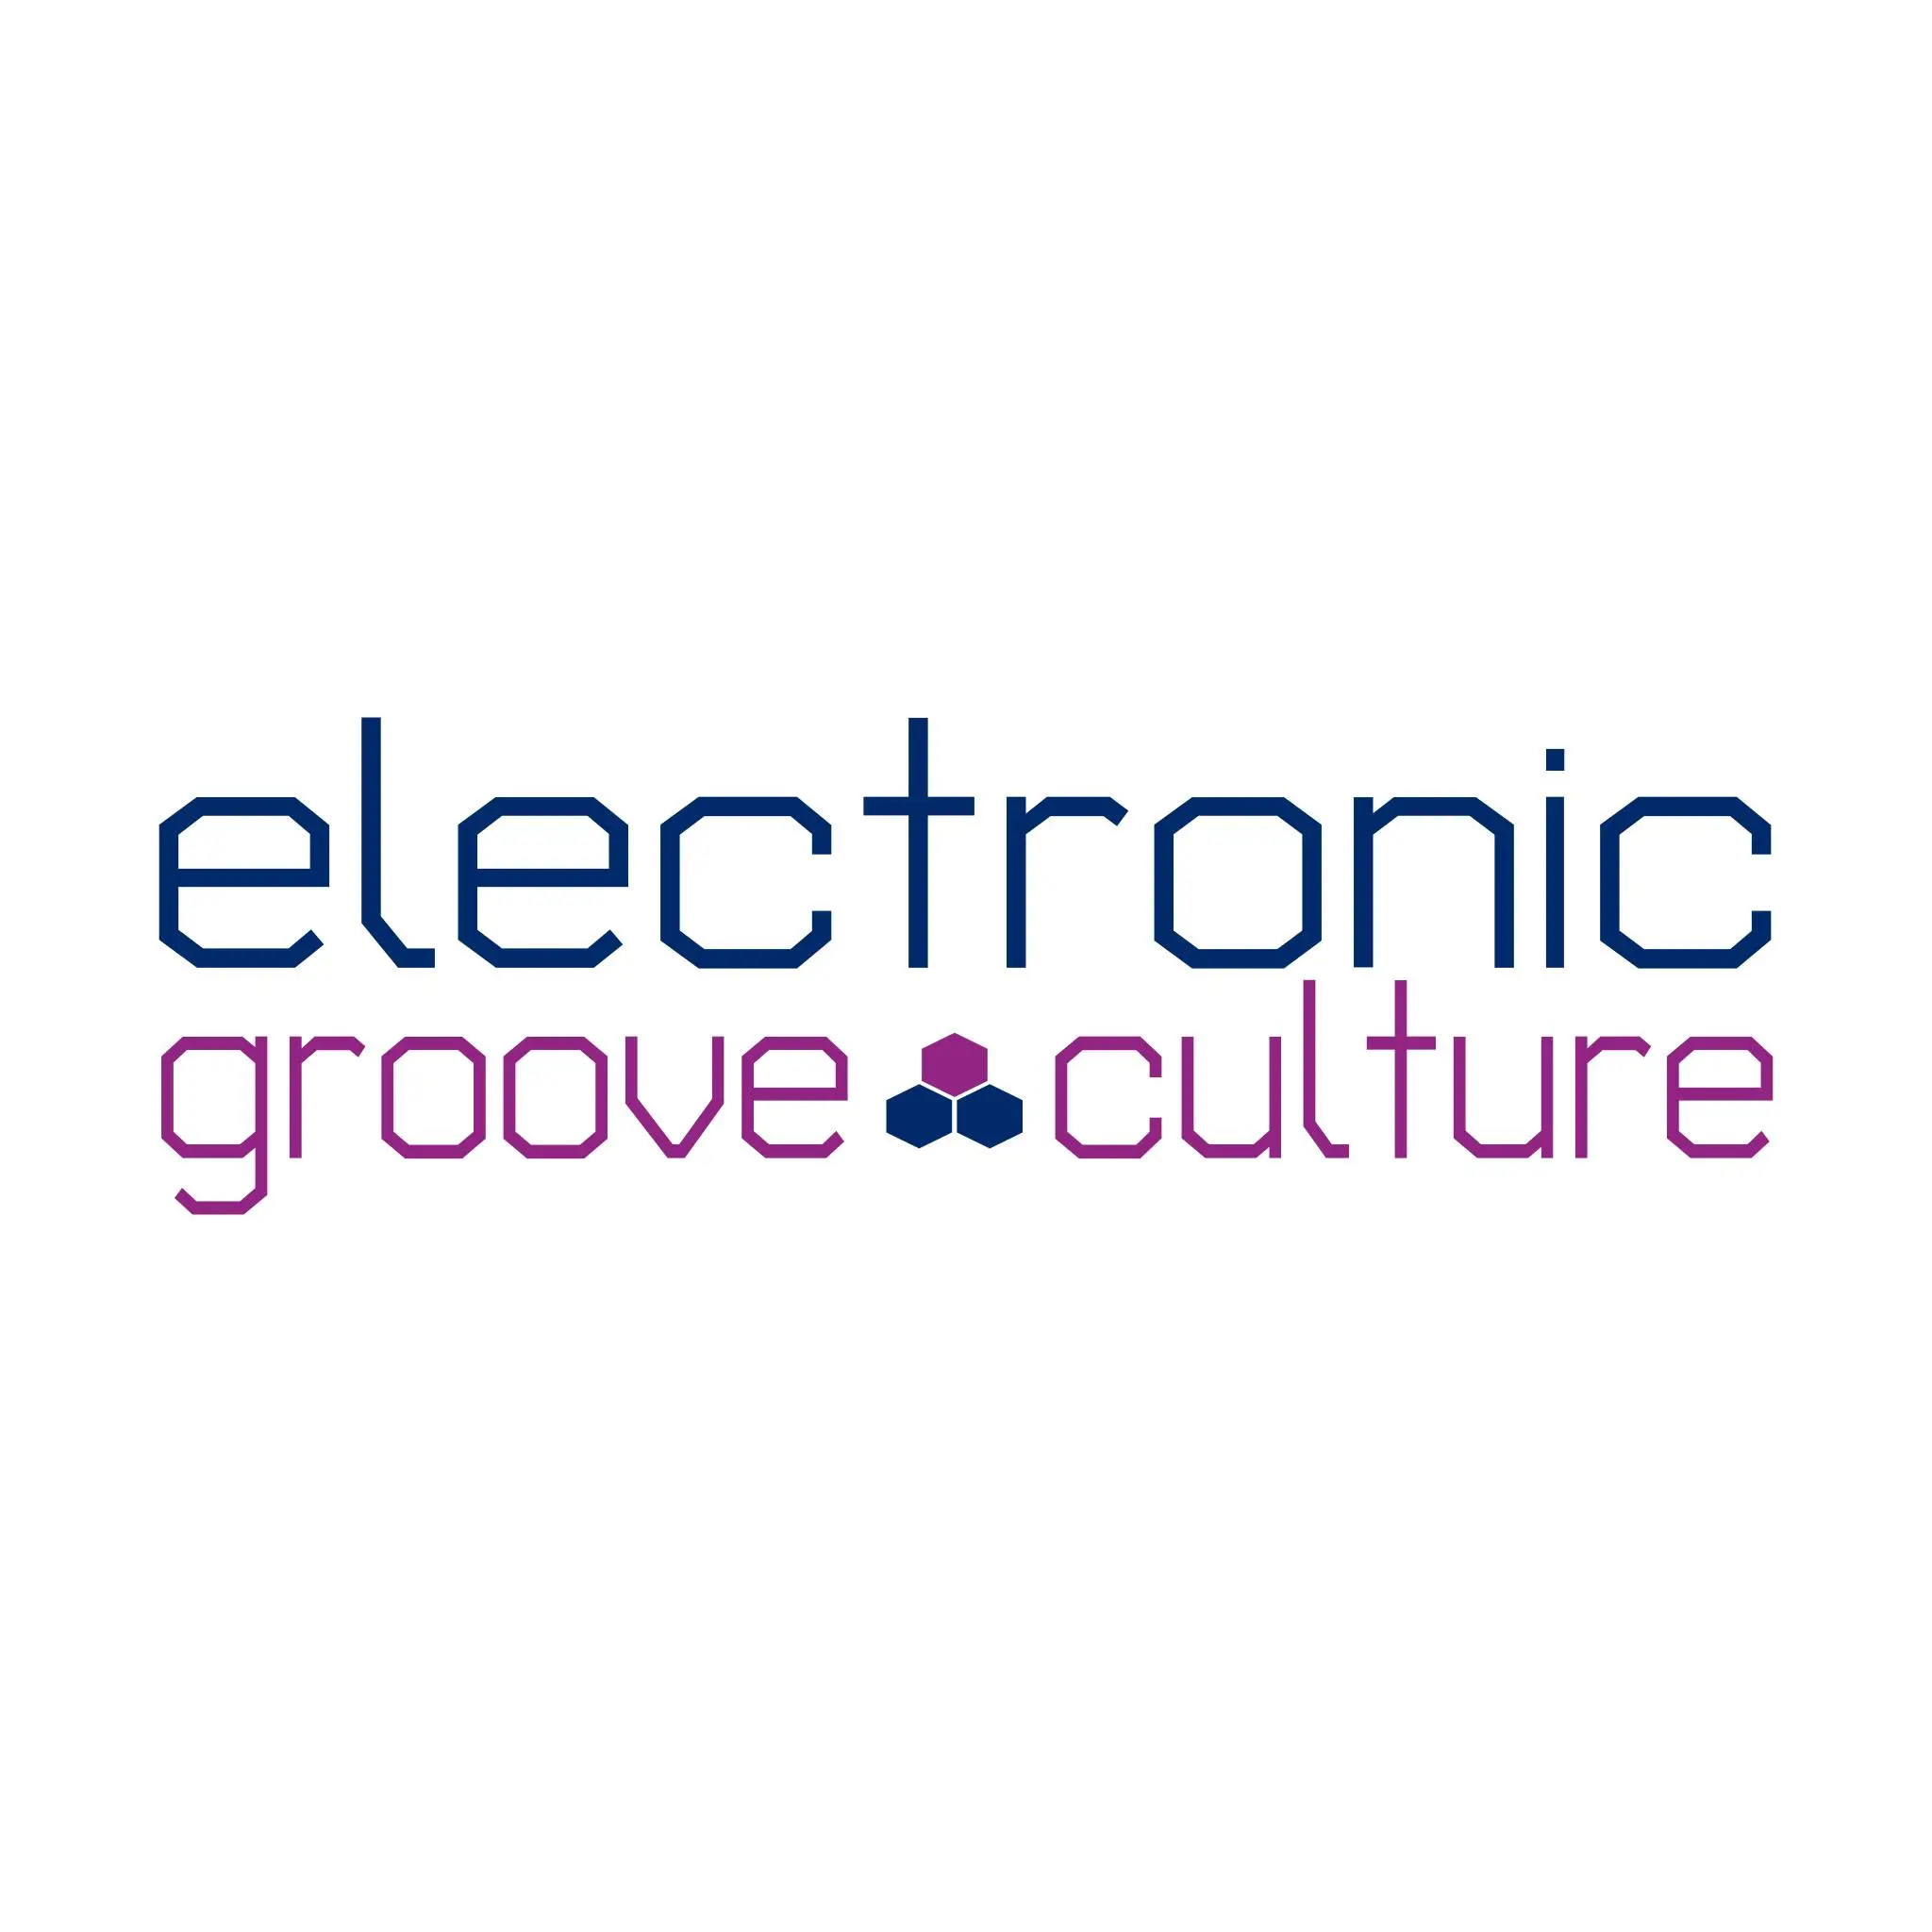 We like: electronic groove culture